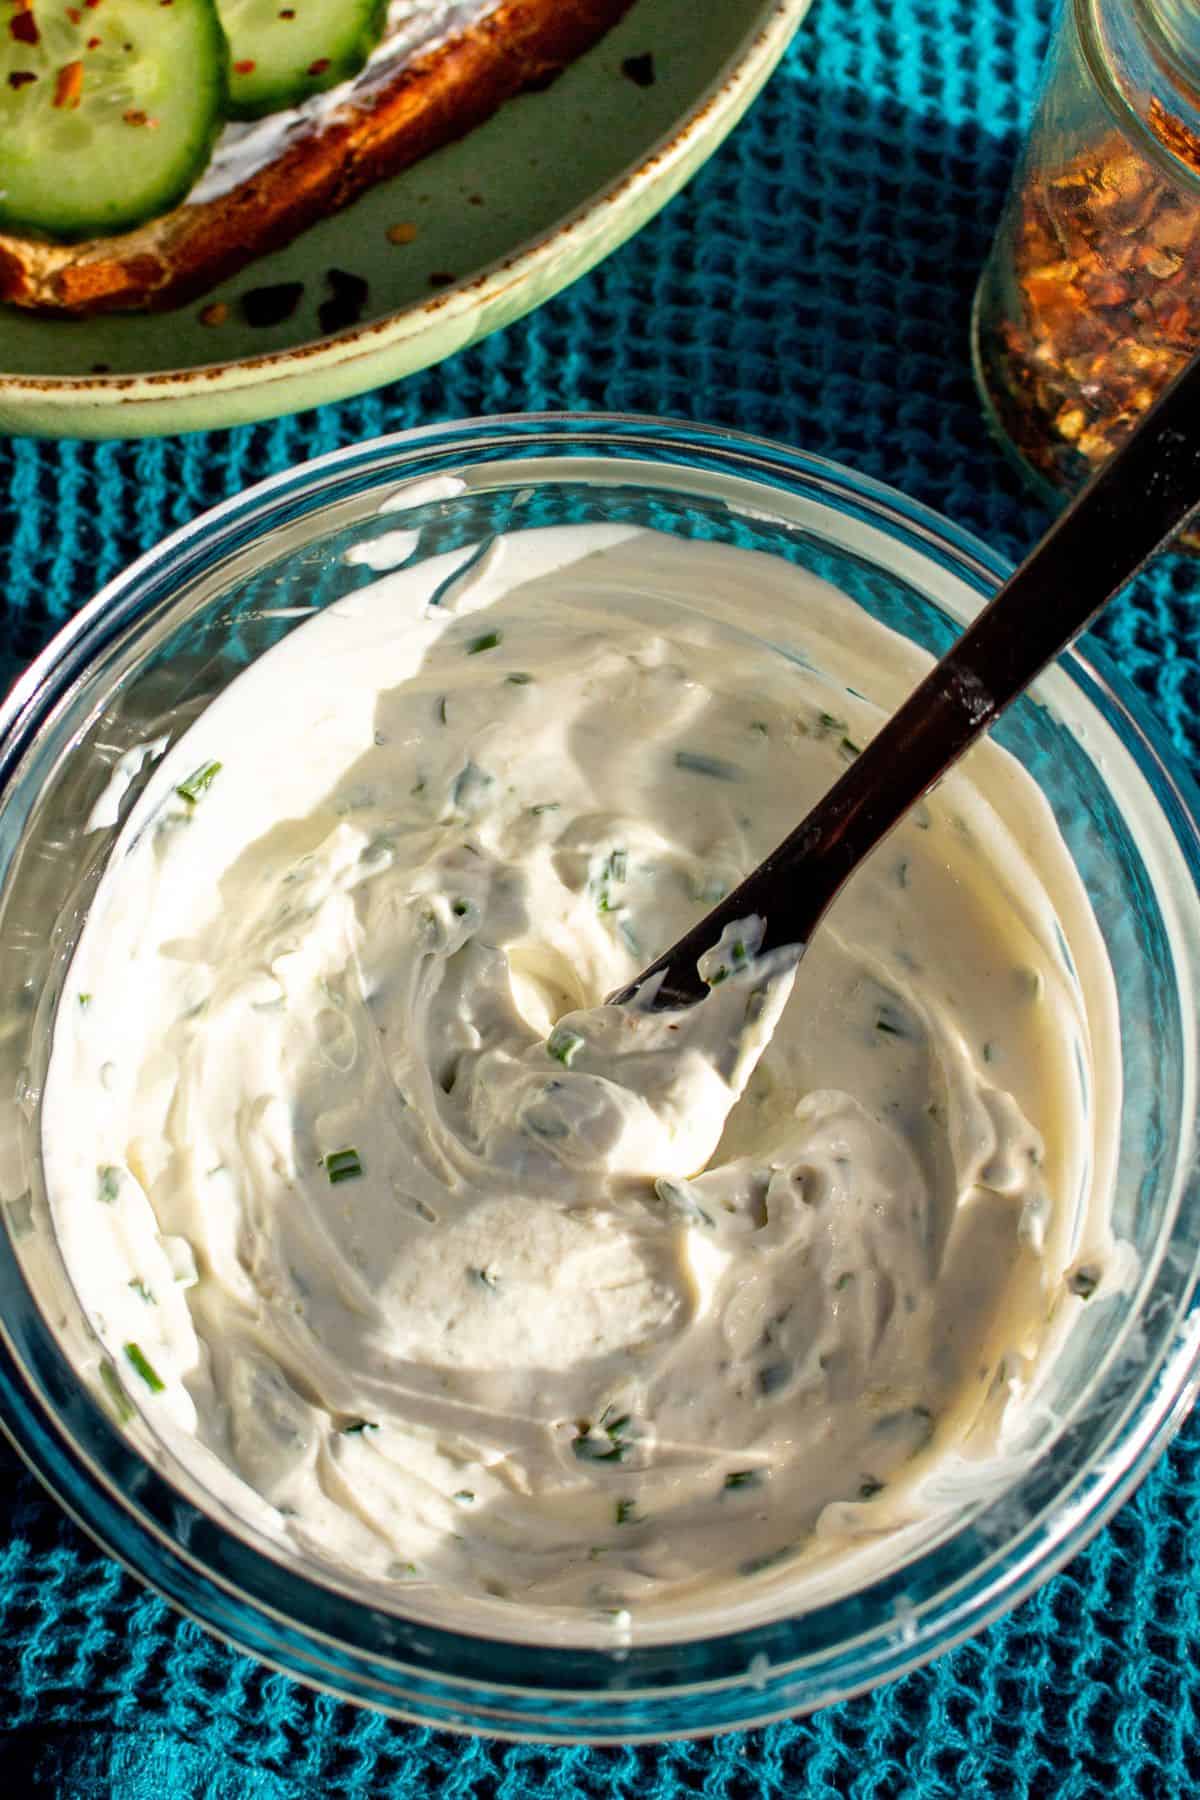 Garlic and herb cream cheese in a glass bowl on a blue cloth with chilli flakes in background and plate with cucumber on cream cheese toast.